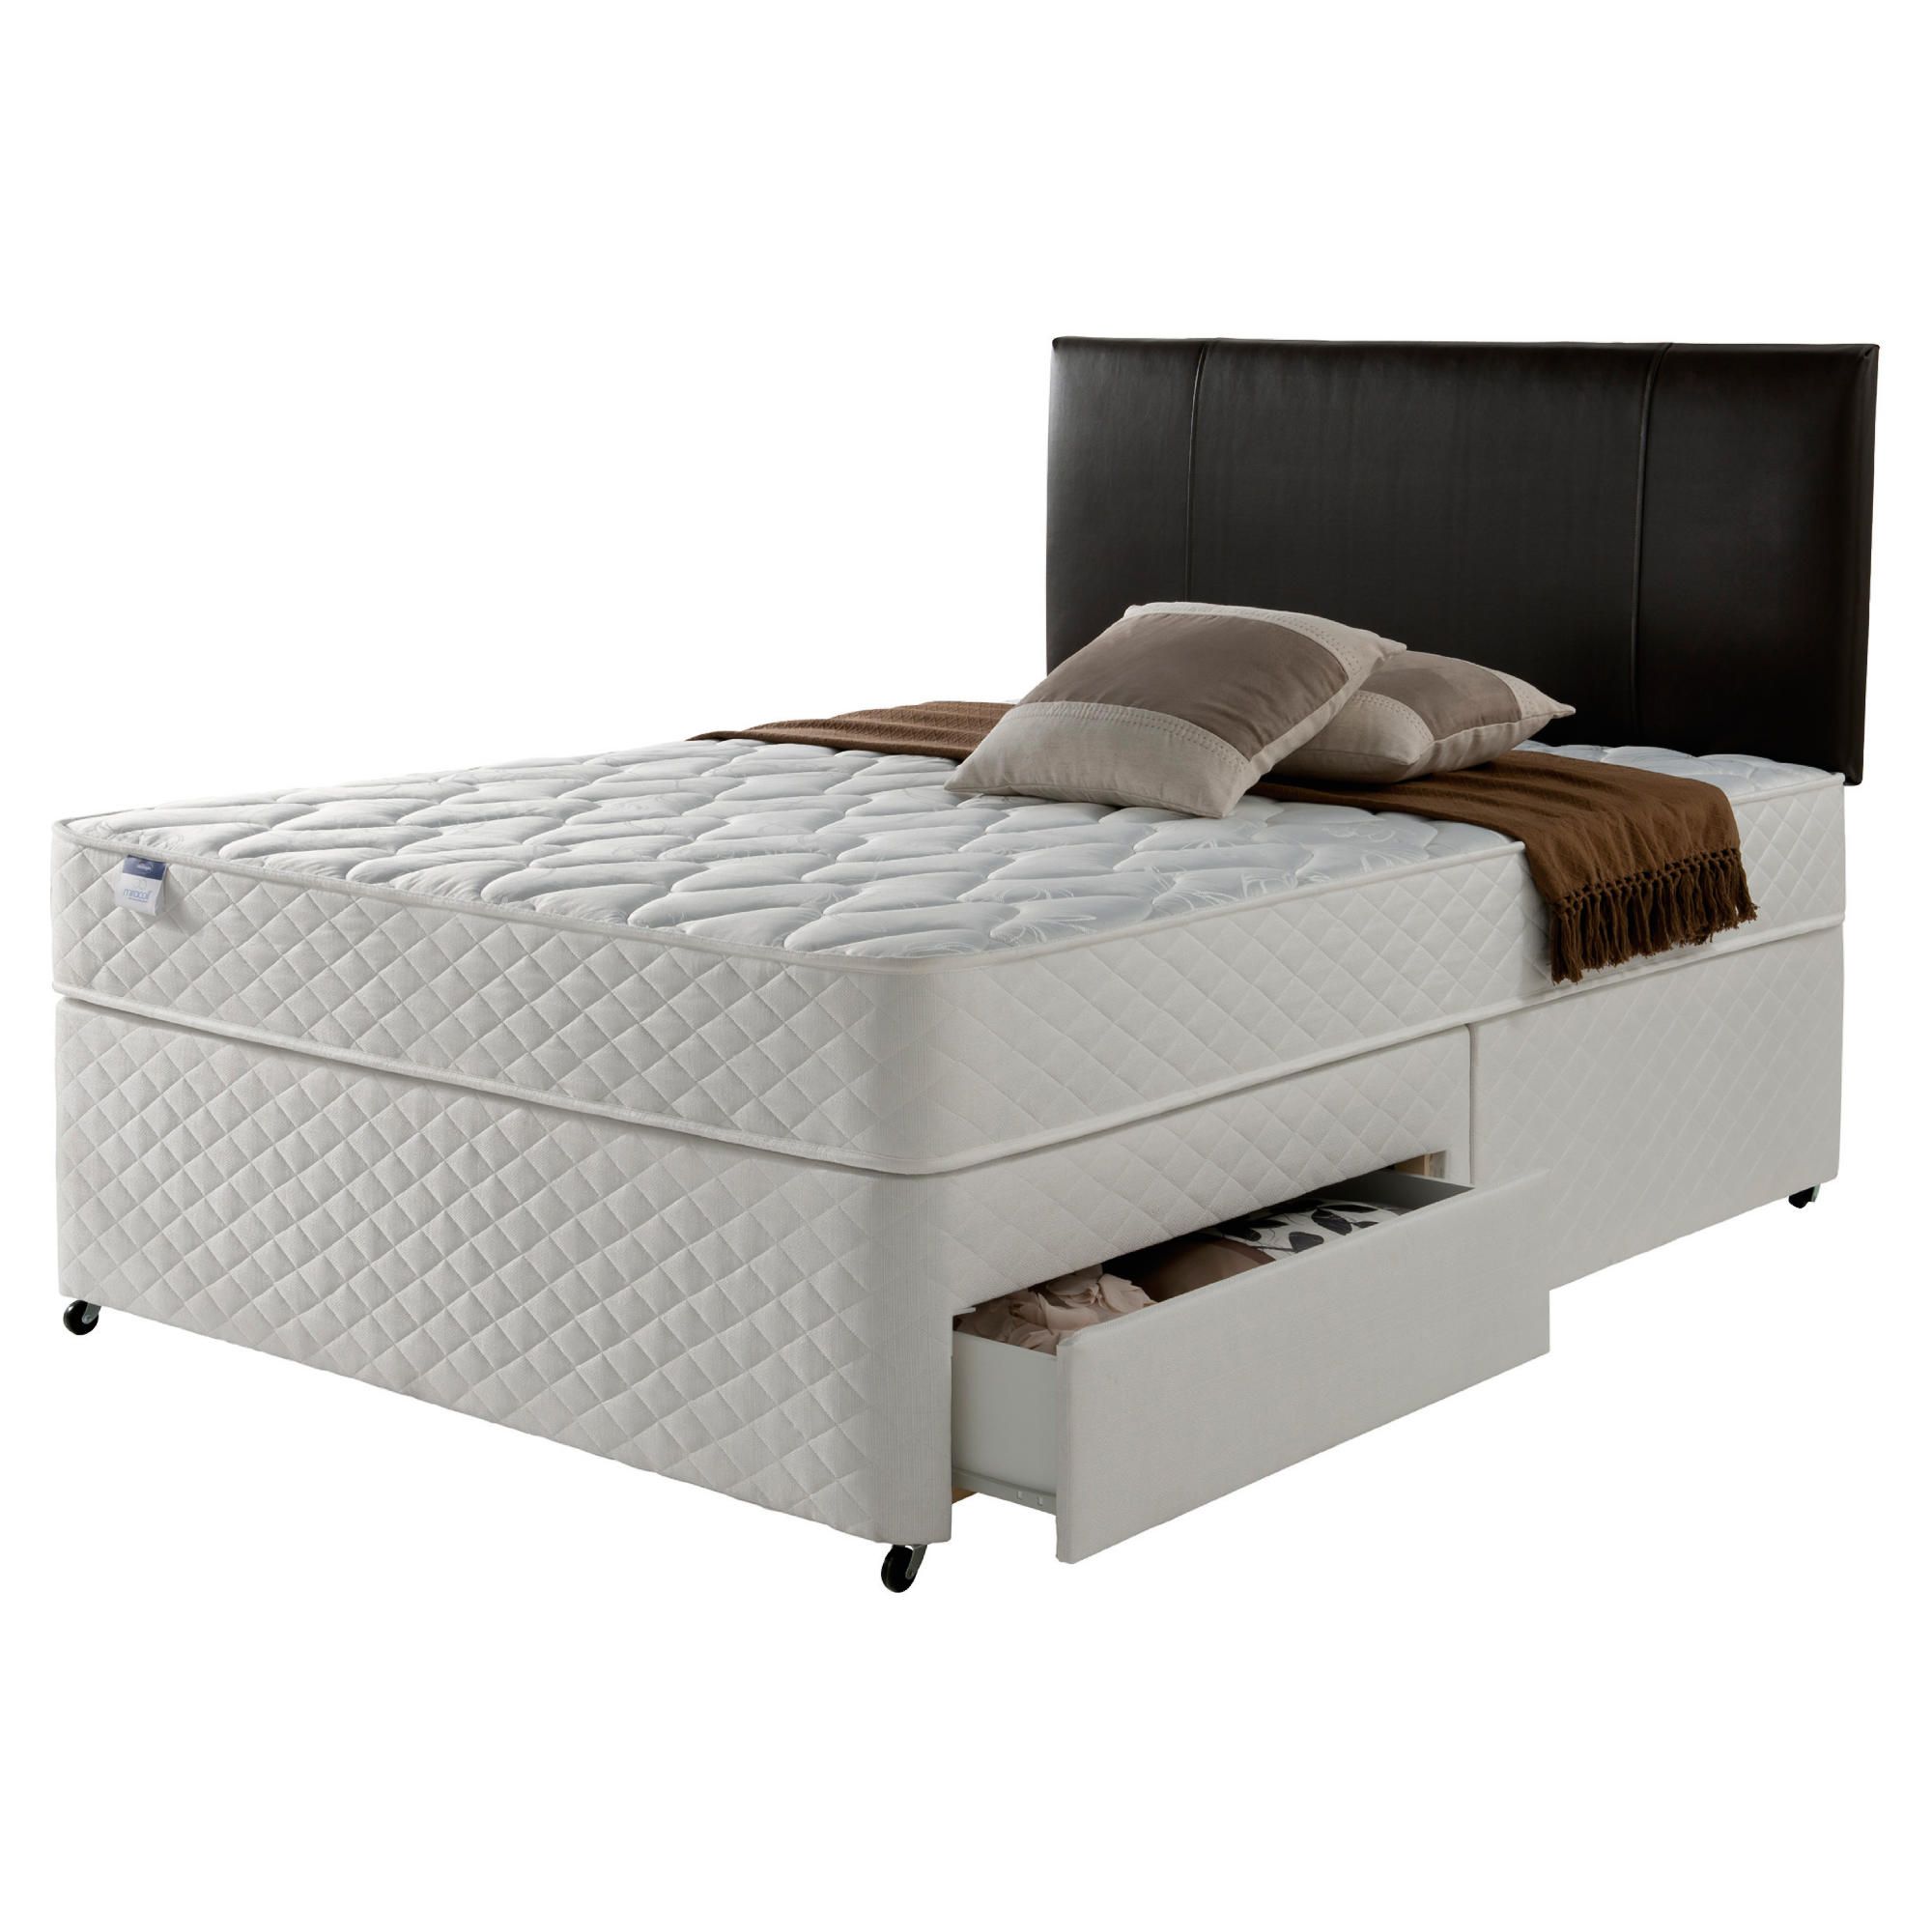 Silentnight Miracoil Comfort Micro Quilt 2 Drawer Divan, Double at Tesco Direct